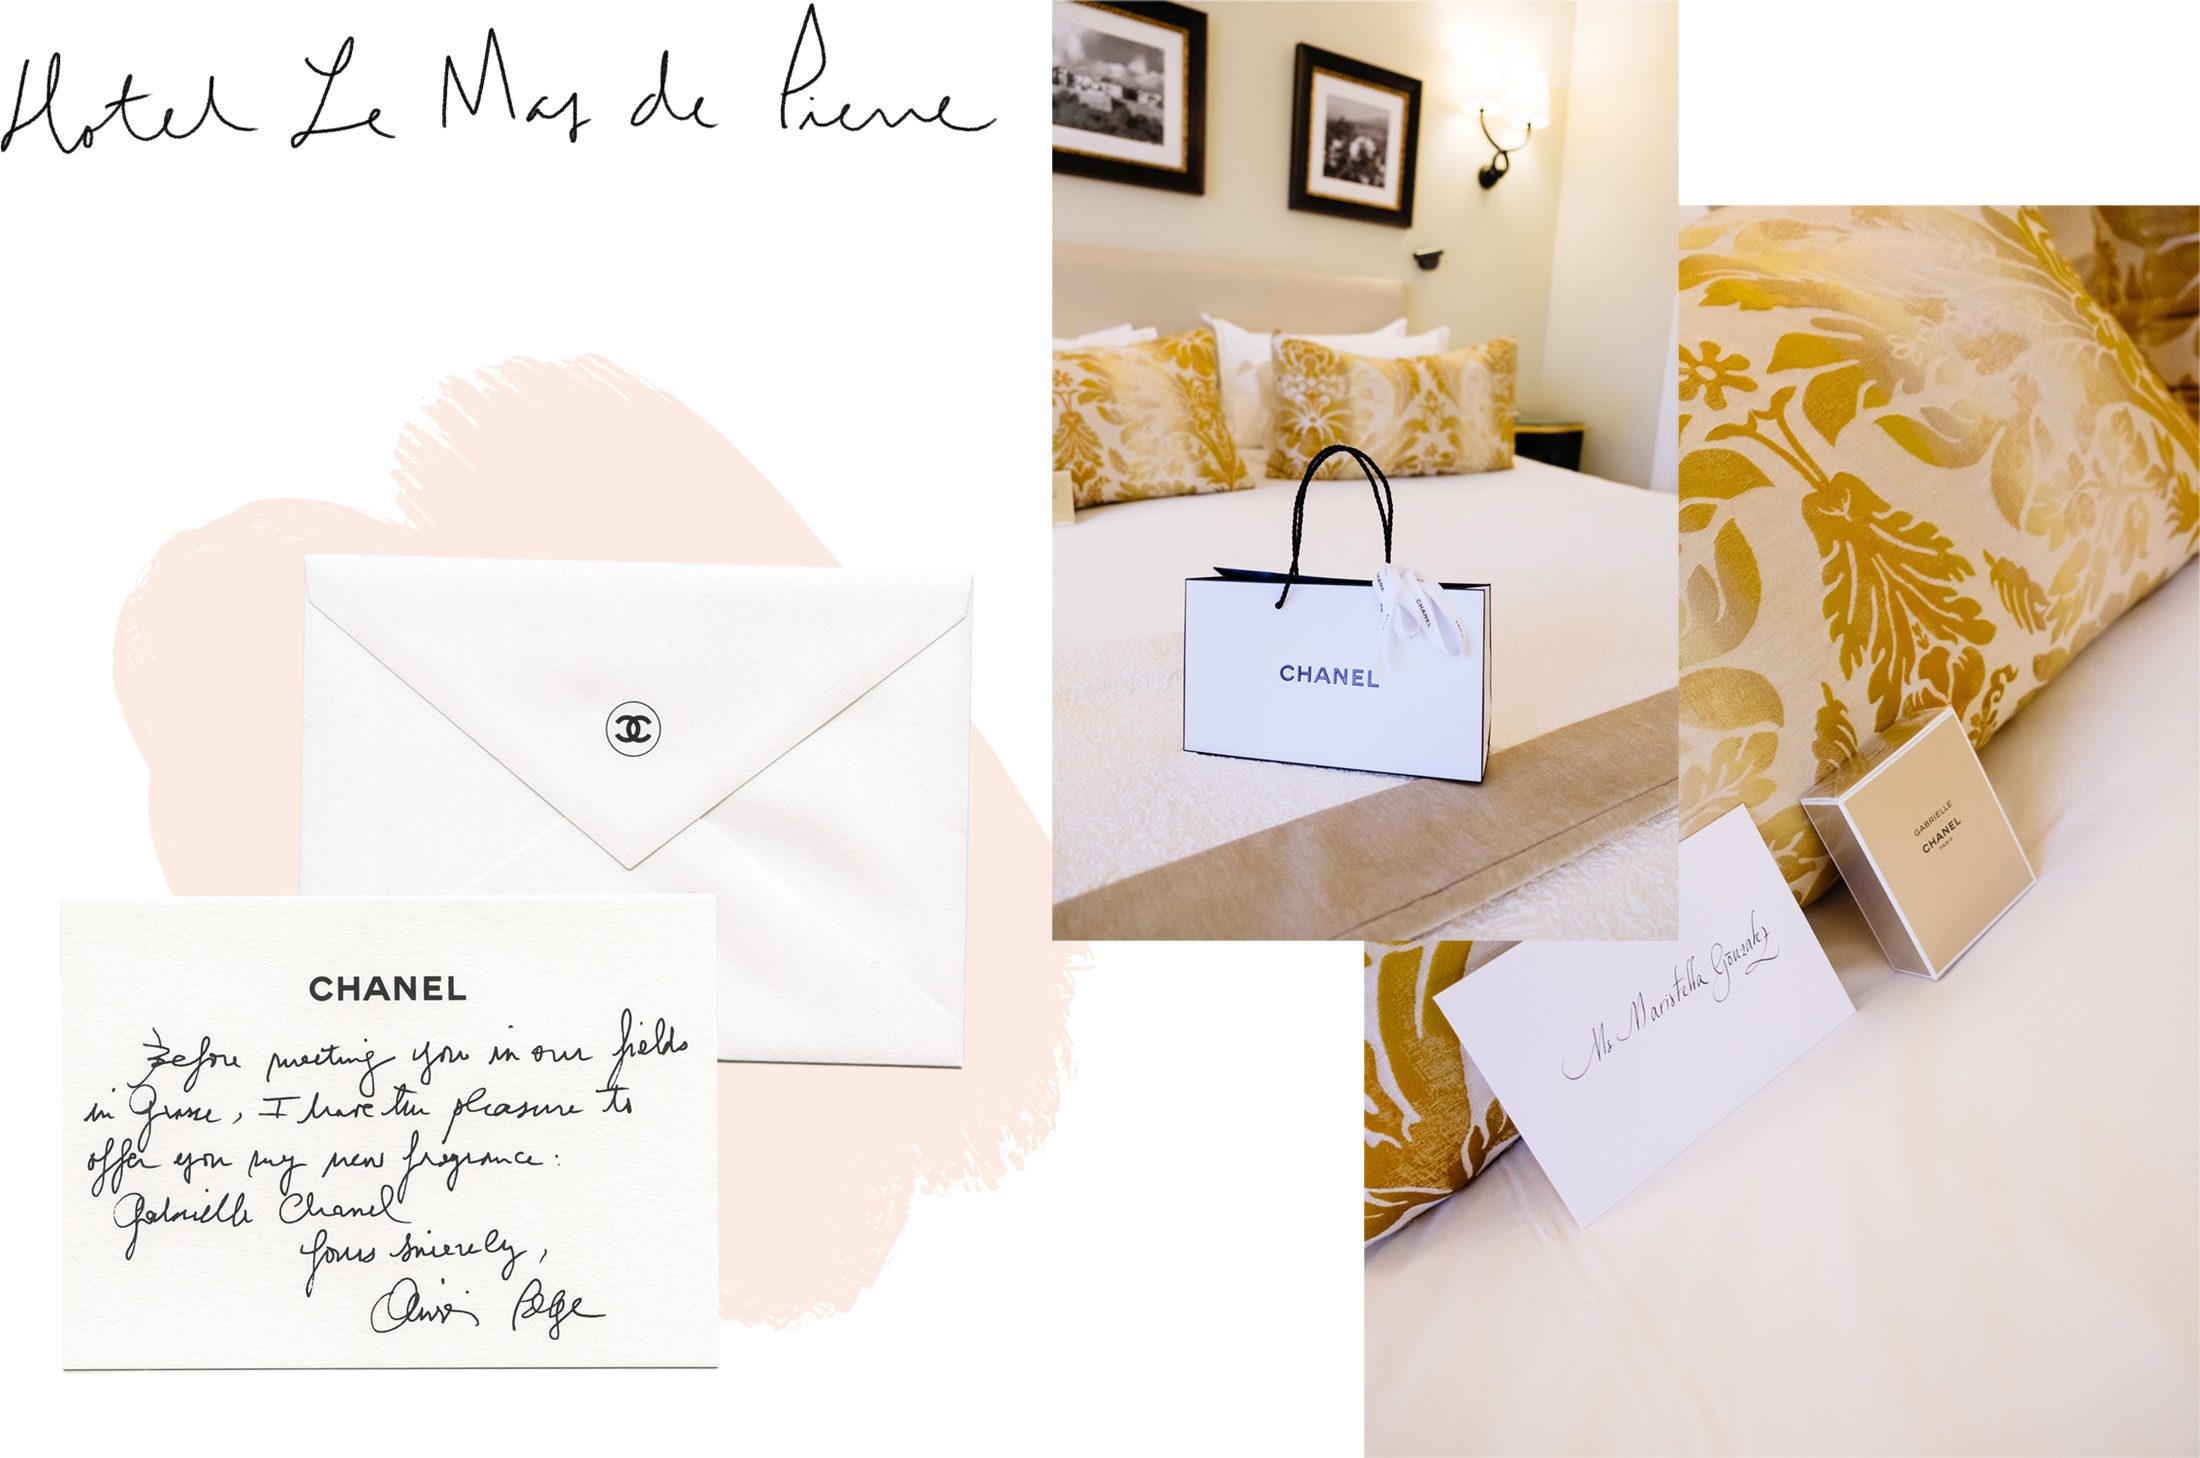 Blog photo collage with a note from Olivier Polge and a gift from Chanel